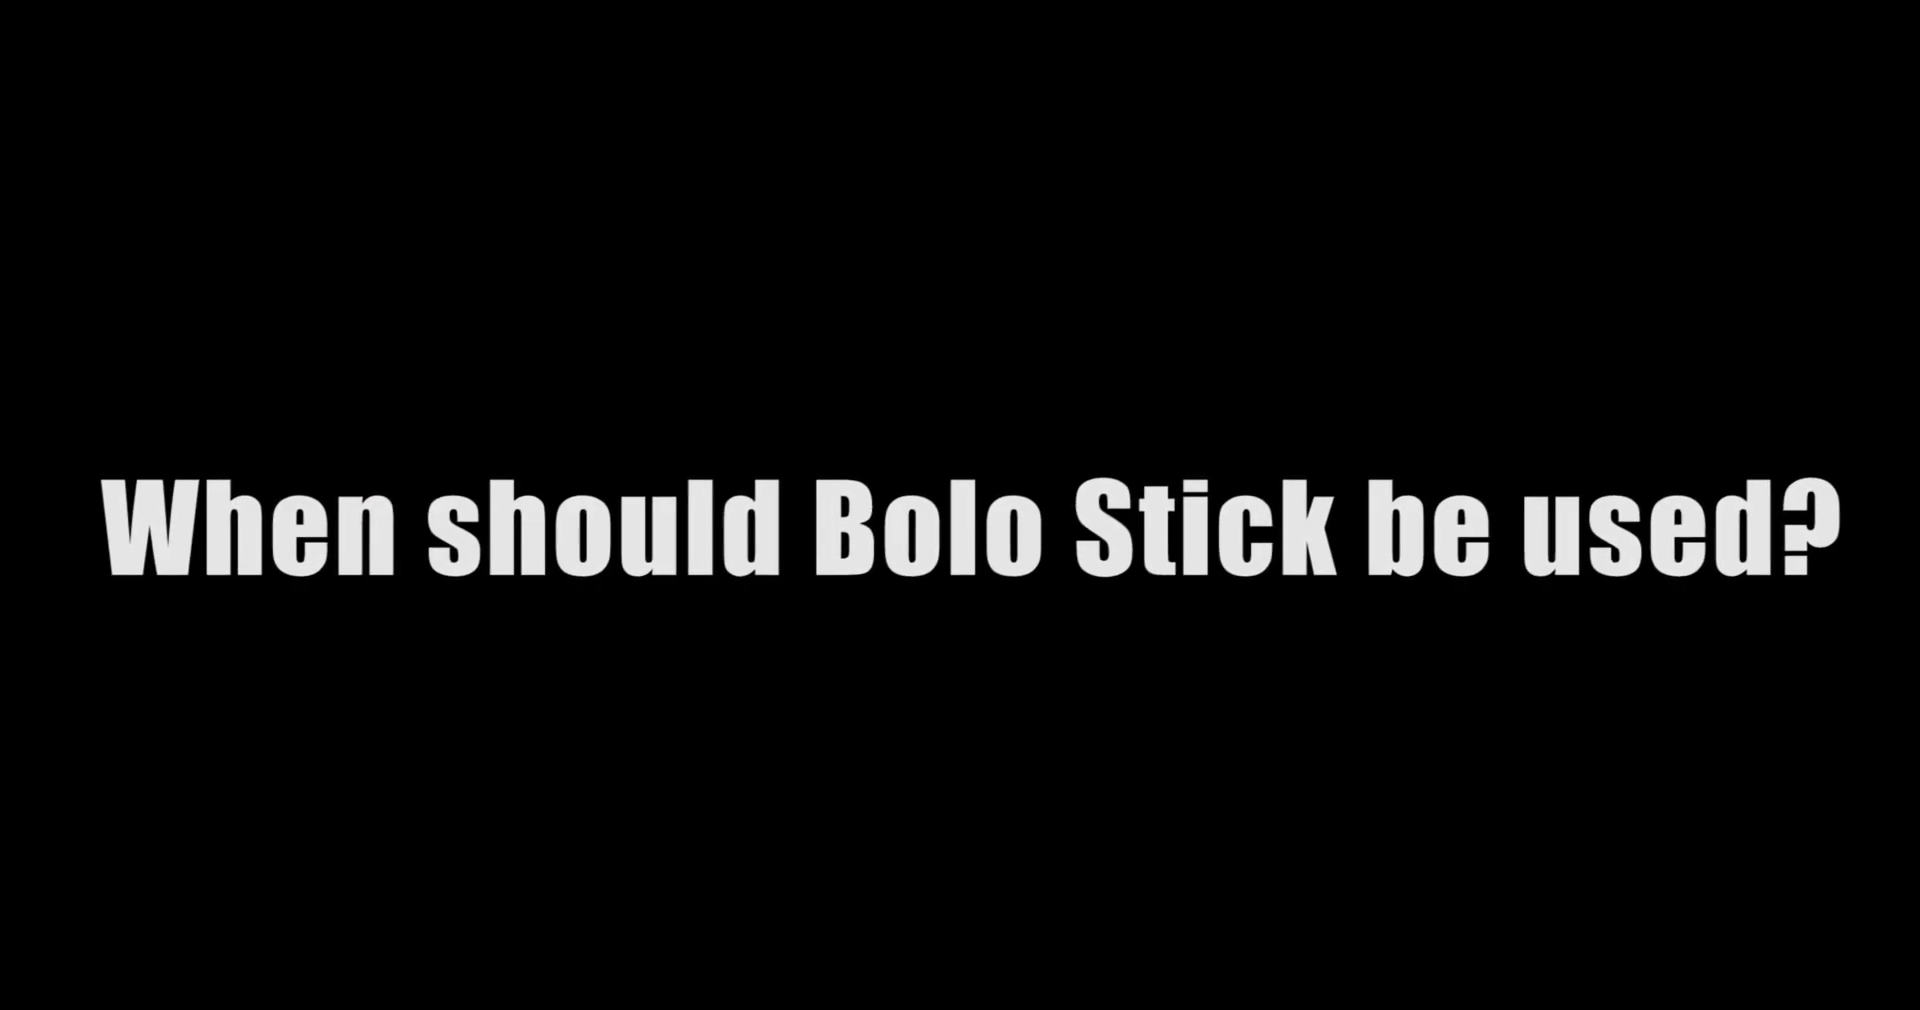 Do You Feel The Simplicity Of Bolo Stick Scares People Away?